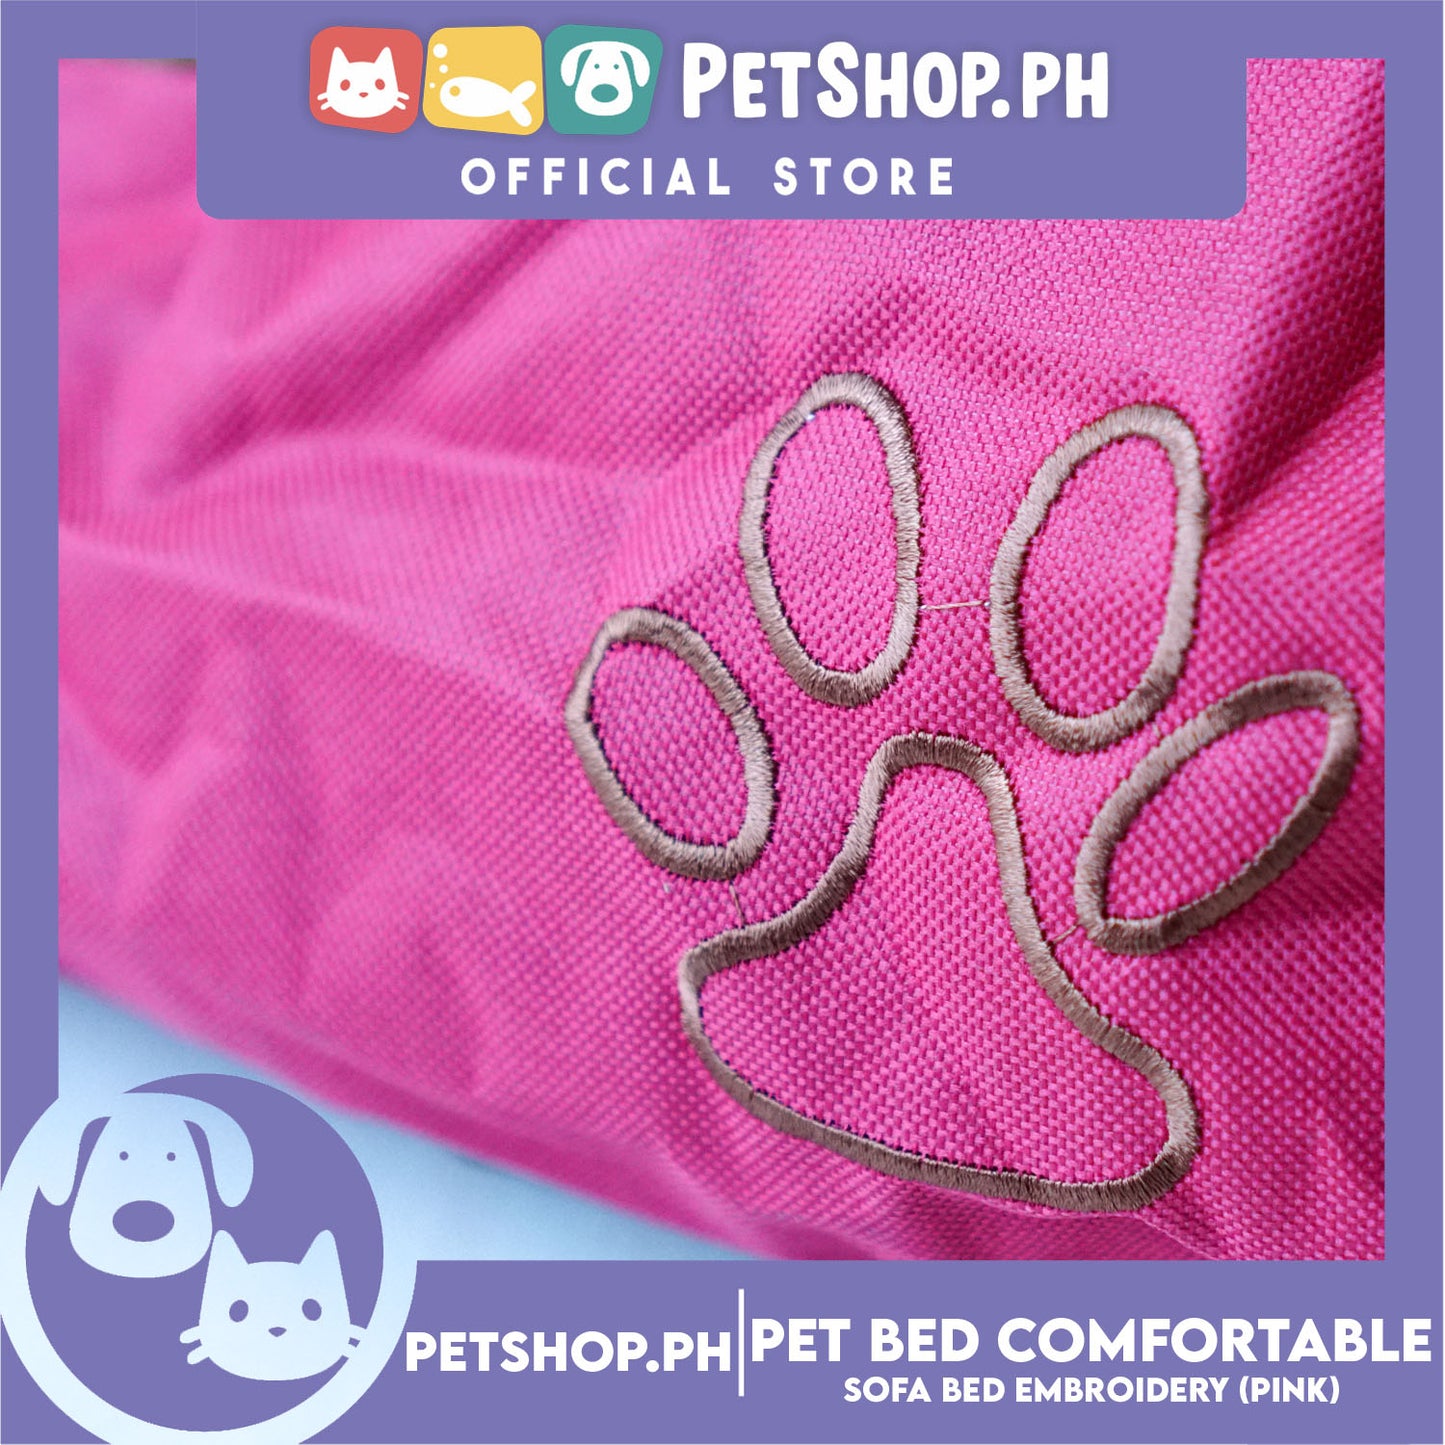 Pet Bed Comfortable Sofa Bed with Paw Embroidery Design 60x45x16cm Small for Dogs & Cats (Pink)